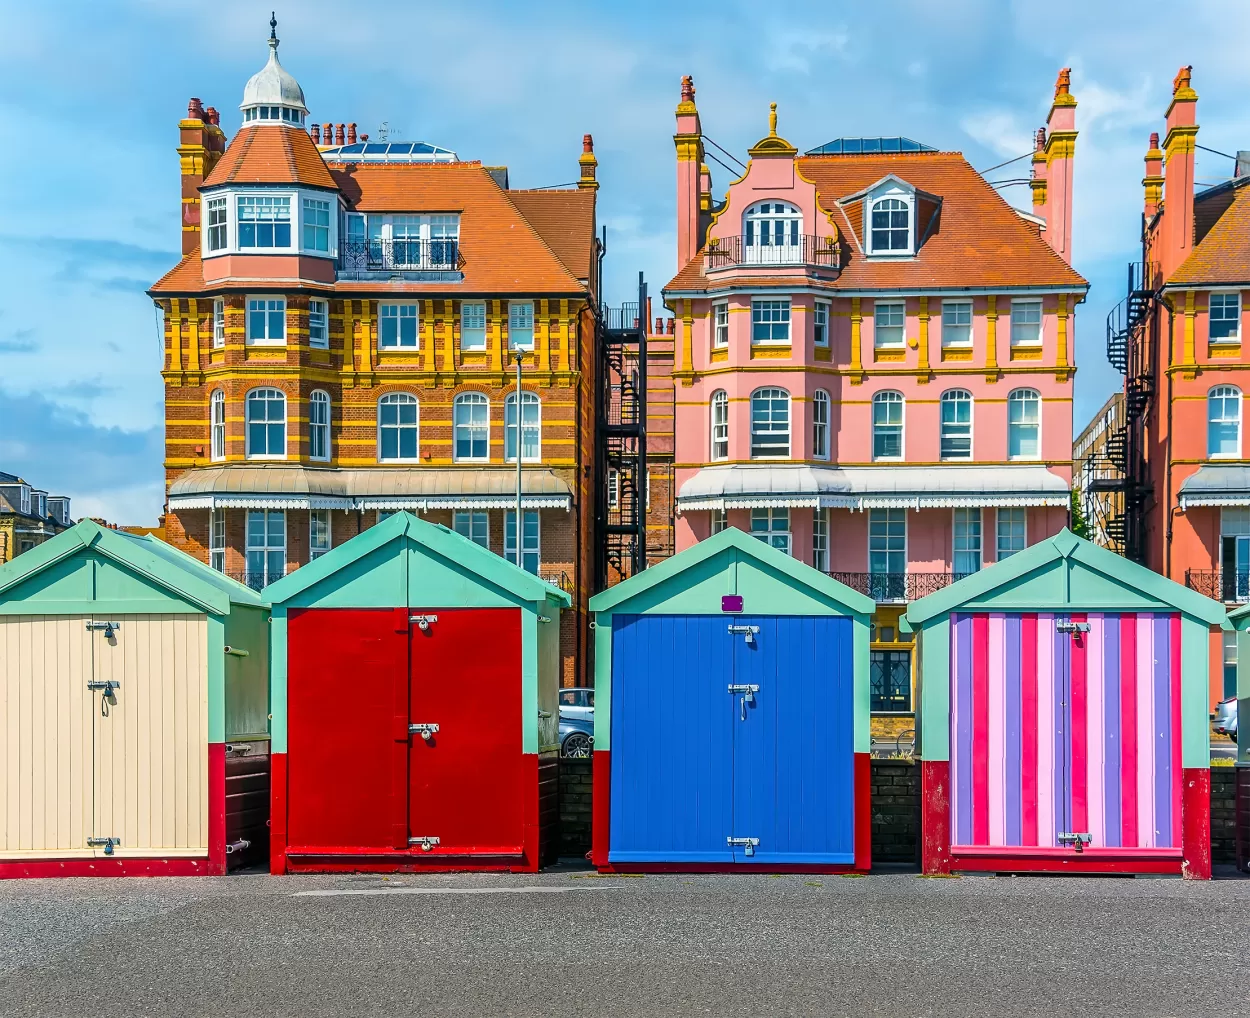 A view of five brightly painted Brighton beach huts which run along the promenade. Behind are three identical looking houses which look very grand, and which, today, will house a number of individual apartments. The sky in the background is very blue.